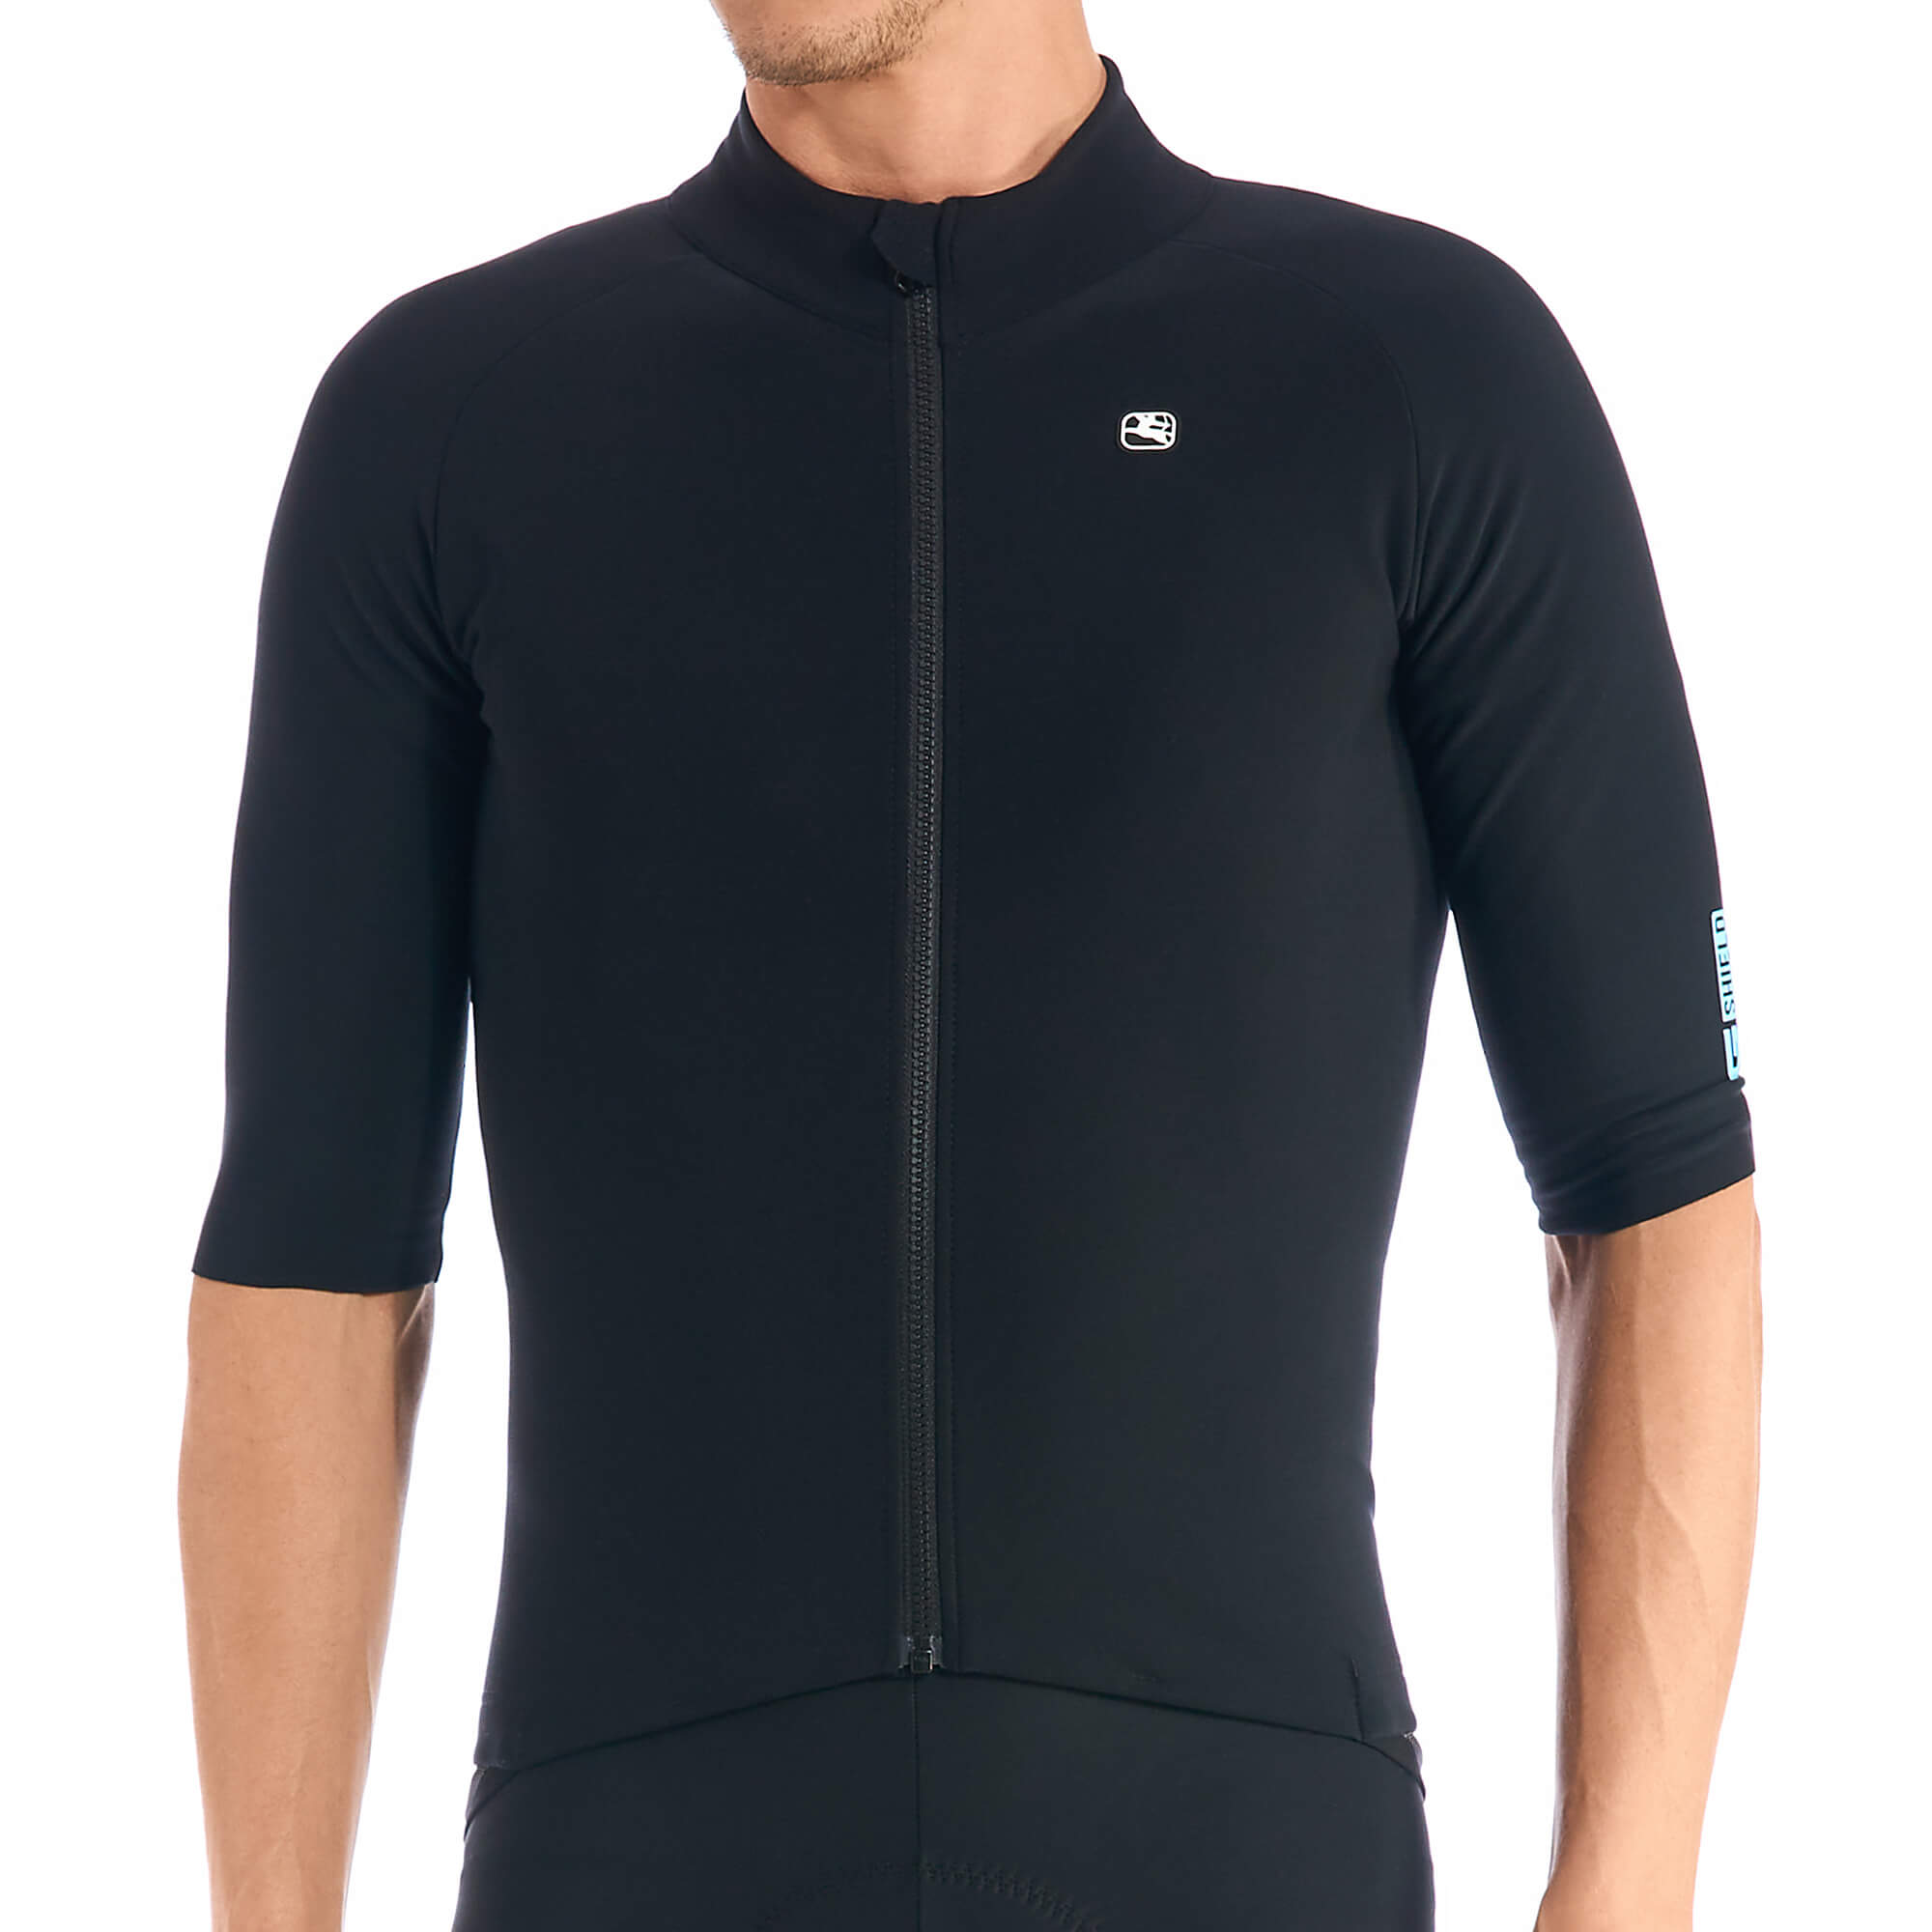 G-Shield Thermal Jersey